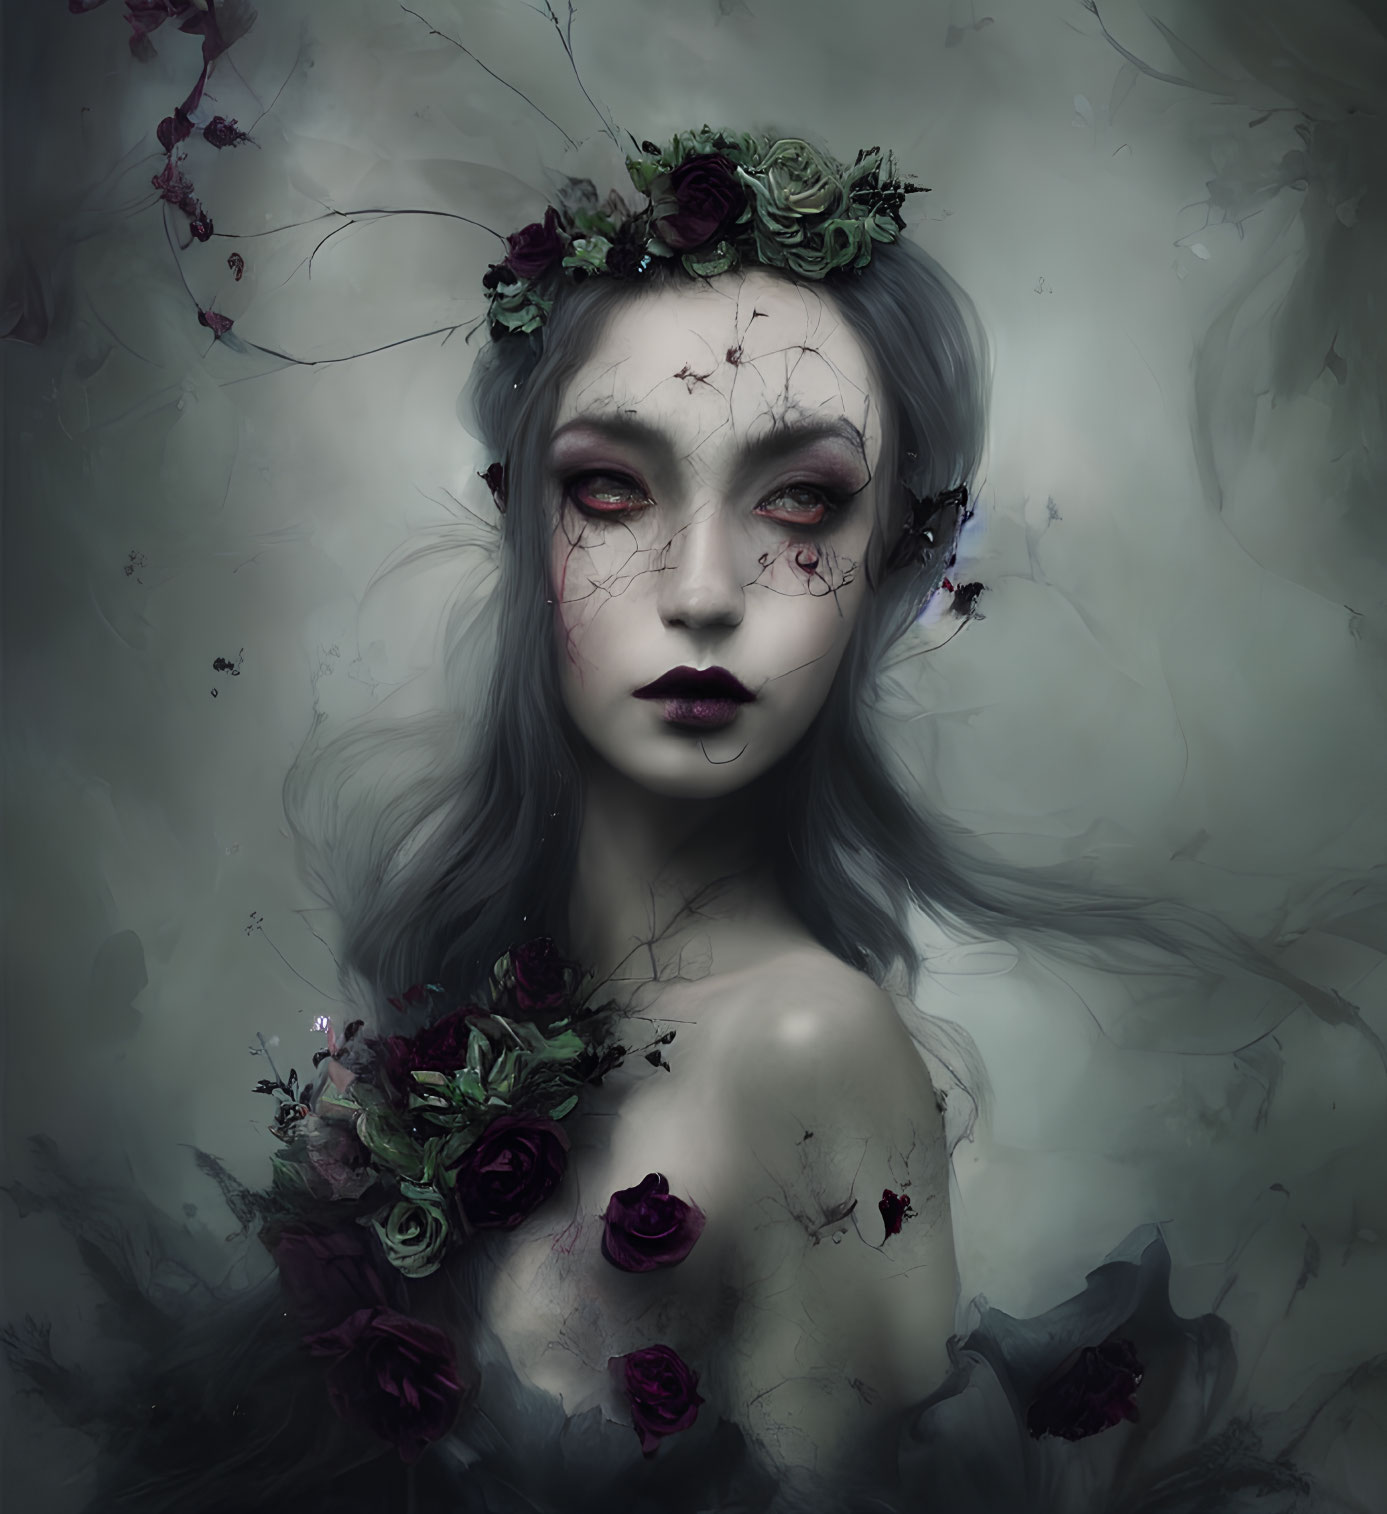 Ethereal gothic woman with flower crown in dark, cracked portrait